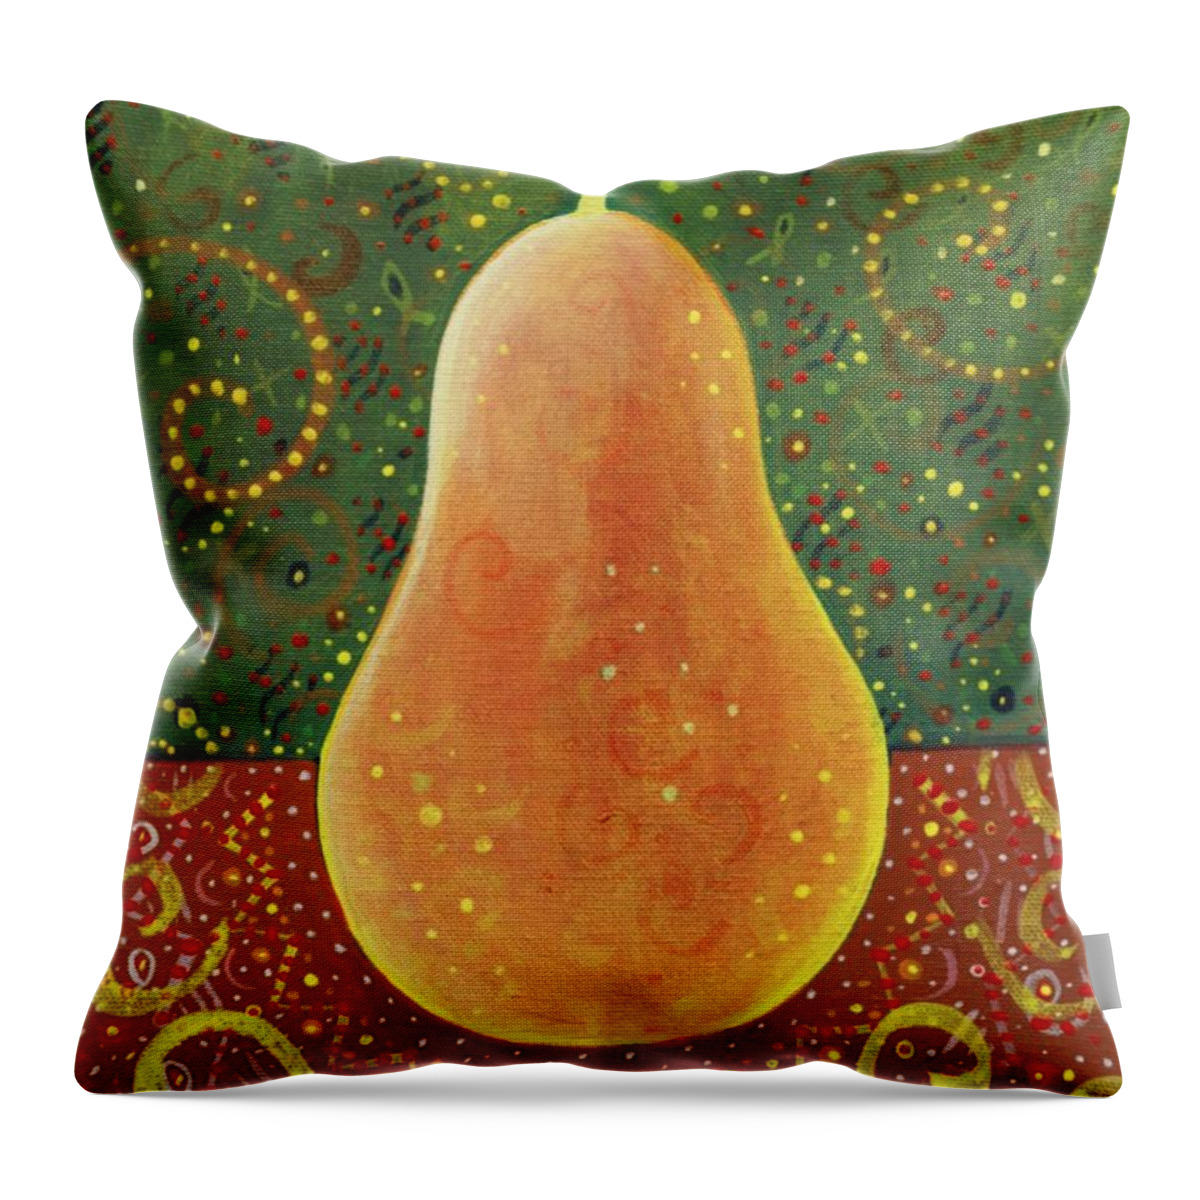 Pear Throw Pillow featuring the painting More Than A Pear by Helena Tiainen